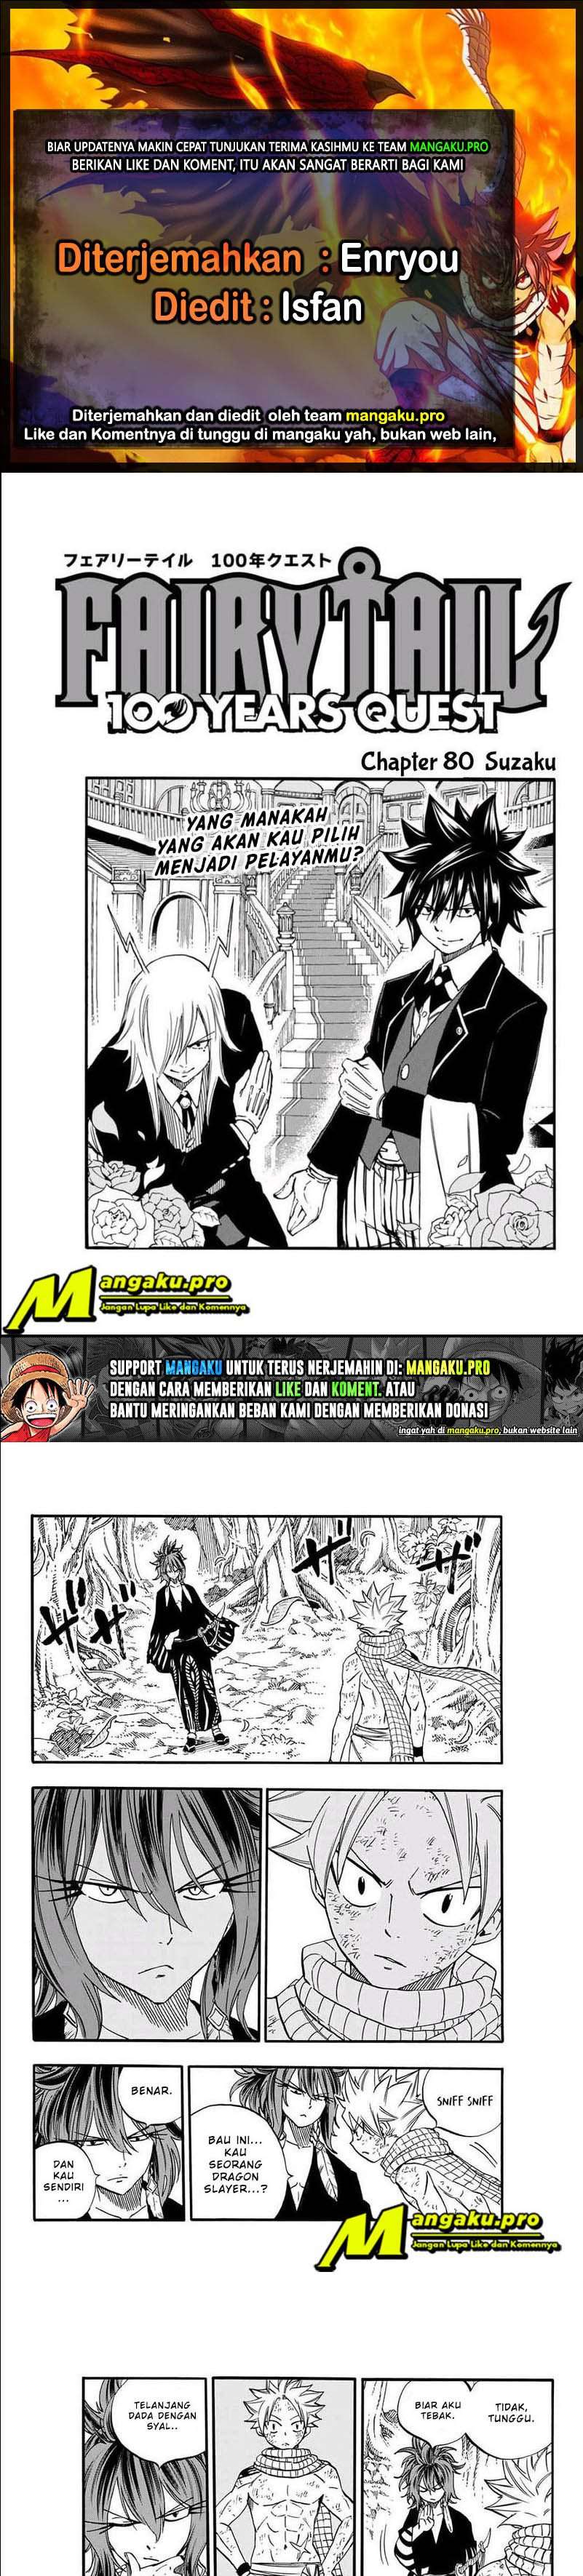 Fairy Tail: 100 Years Quest: Chapter 80 - Page 1